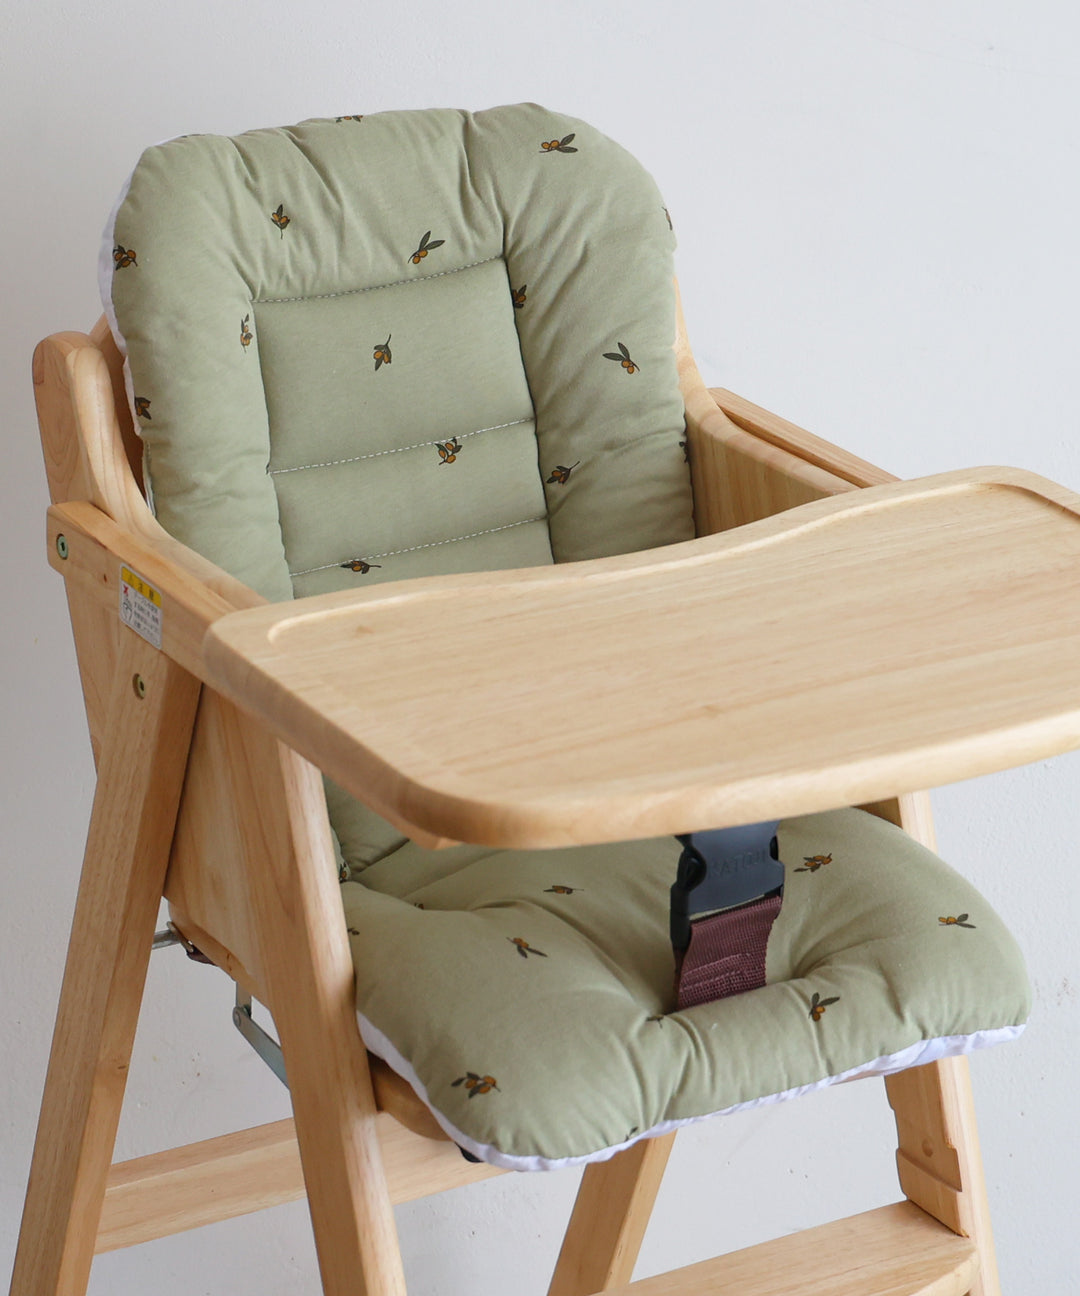 Washable Highchair cushion (Jersey knit)